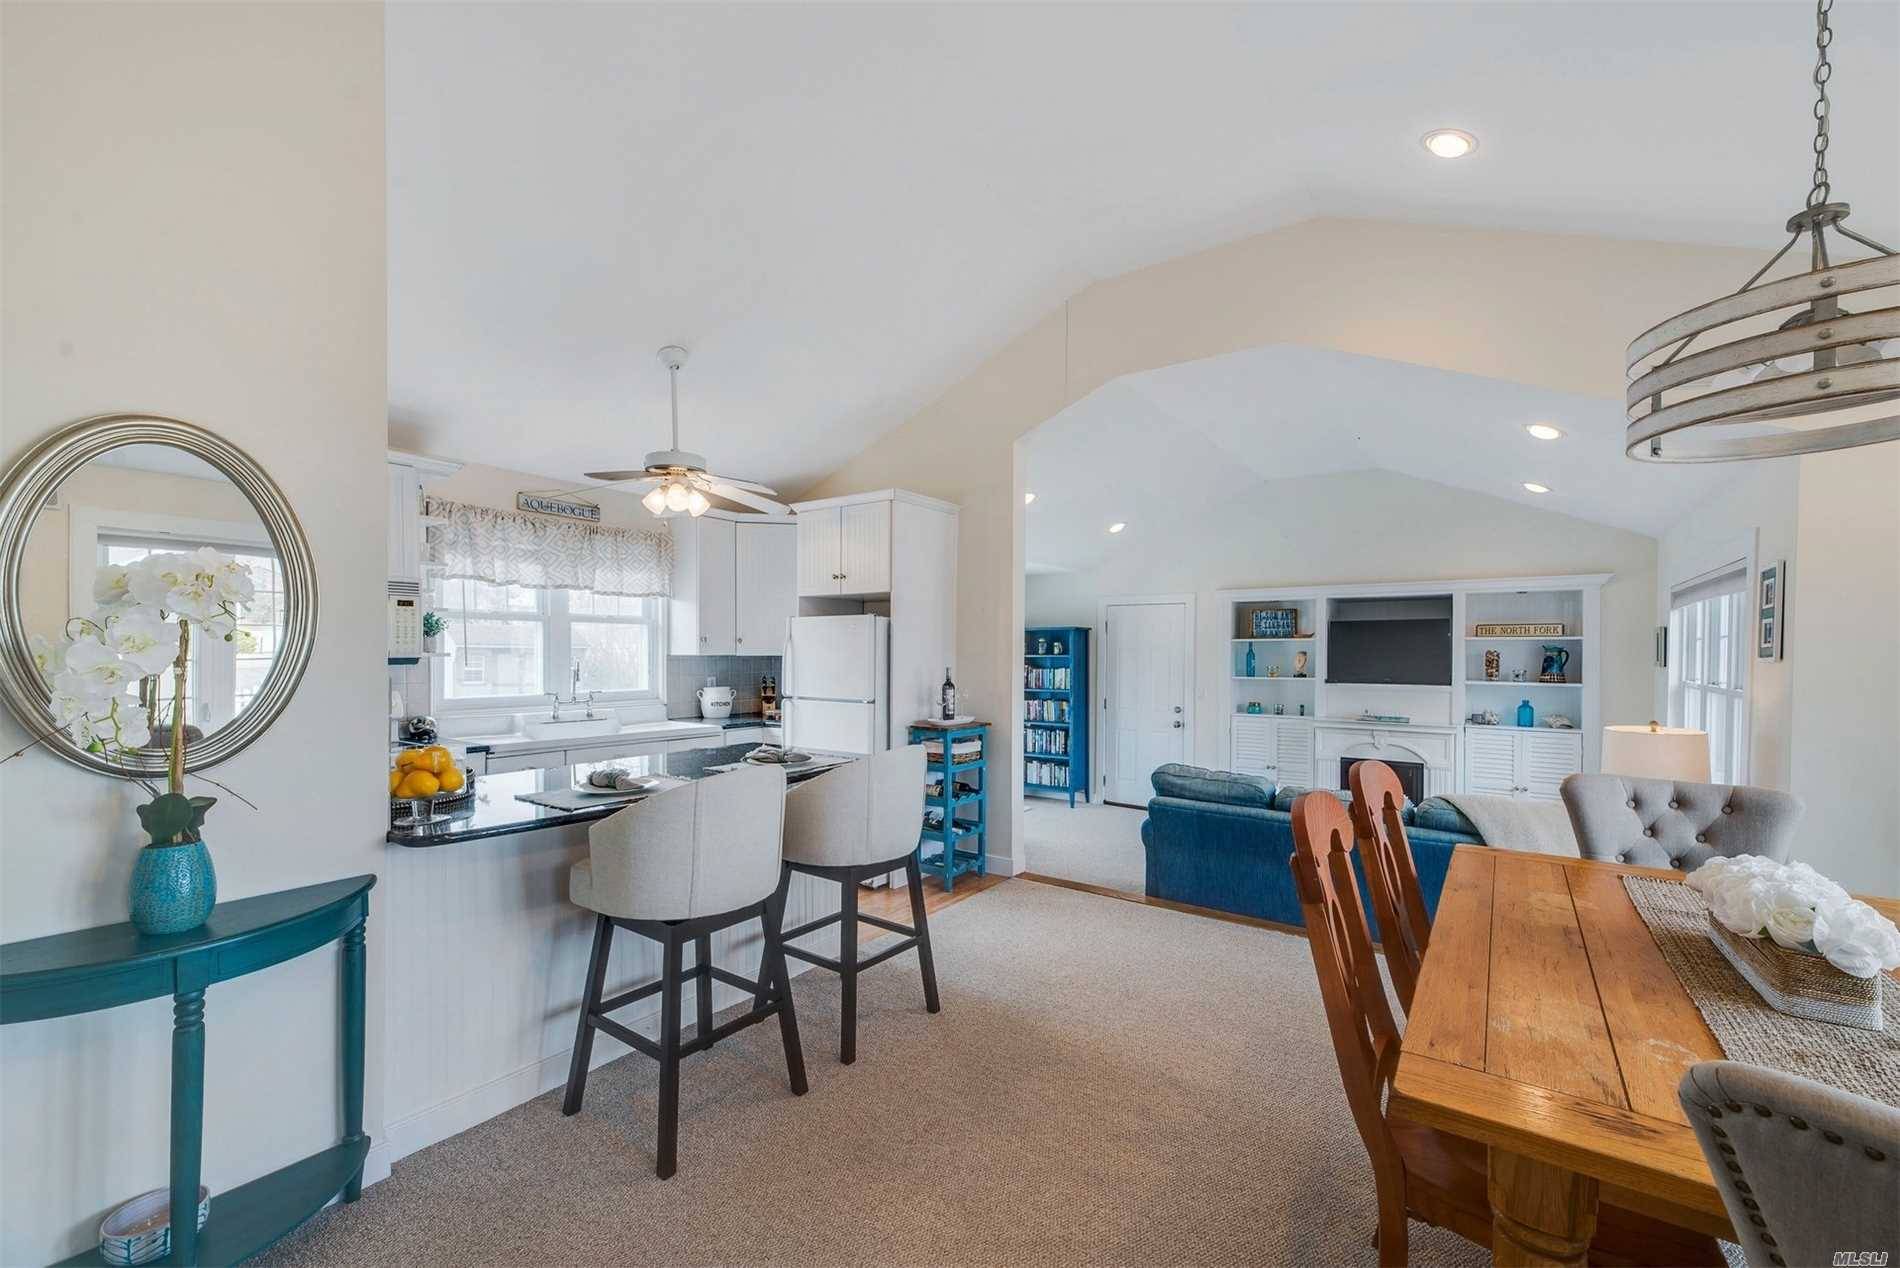 Exceptional Beachouse Getaway Delightfully Renovated Including Open Floor Plan, High Ceilings And Plenty Of Light, With Charming Family Room Leading To Outside Deck Perfect For Entertaining Including Outdoor Shower For ...